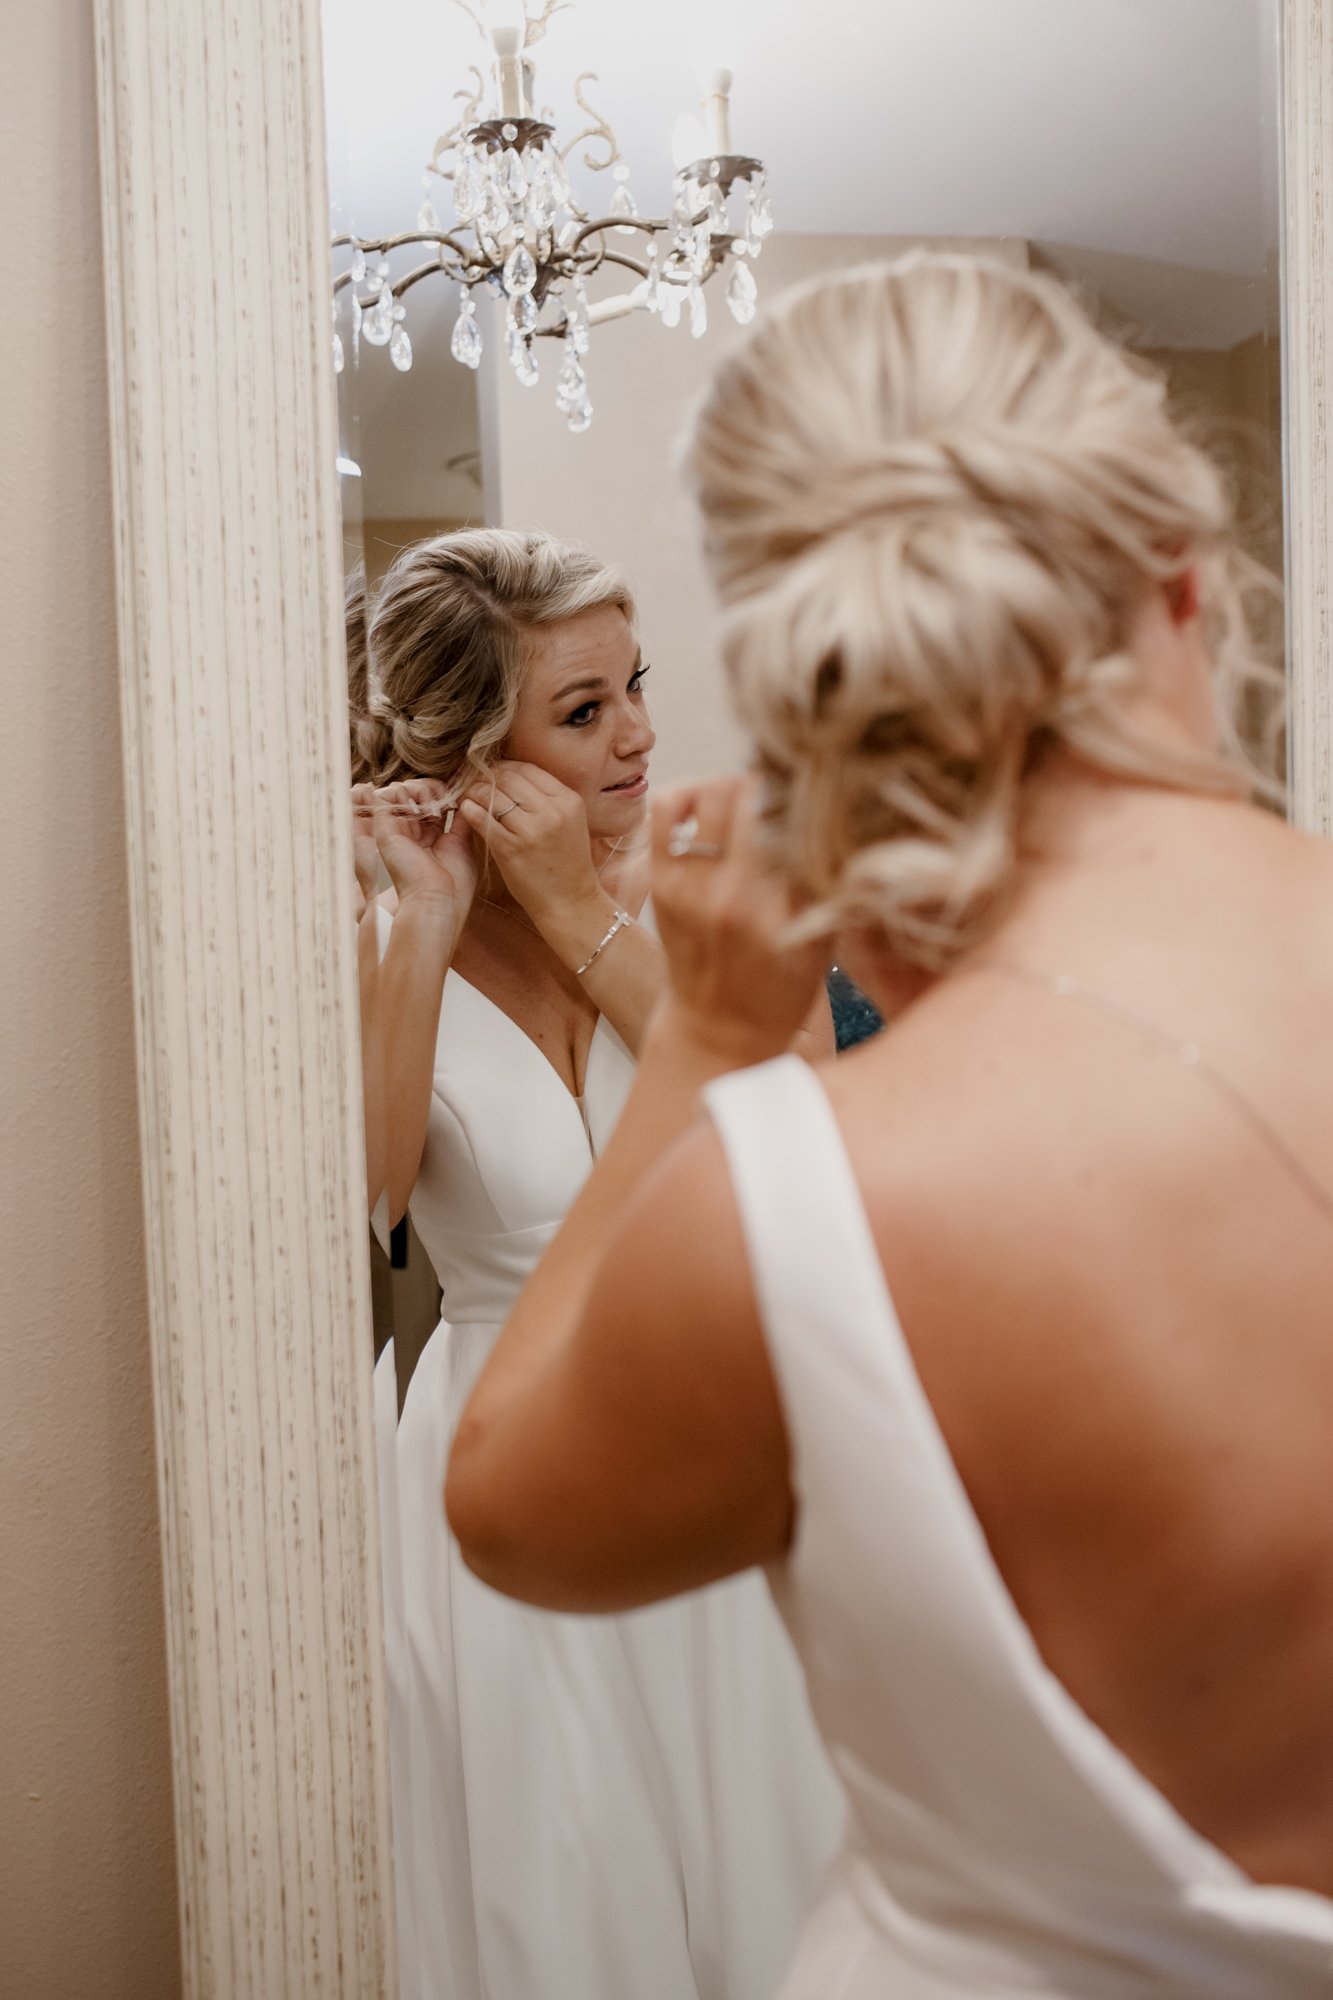 Preparations bride getting ready putting earring on. Wedding at Shirley Acres (Houston, TX)